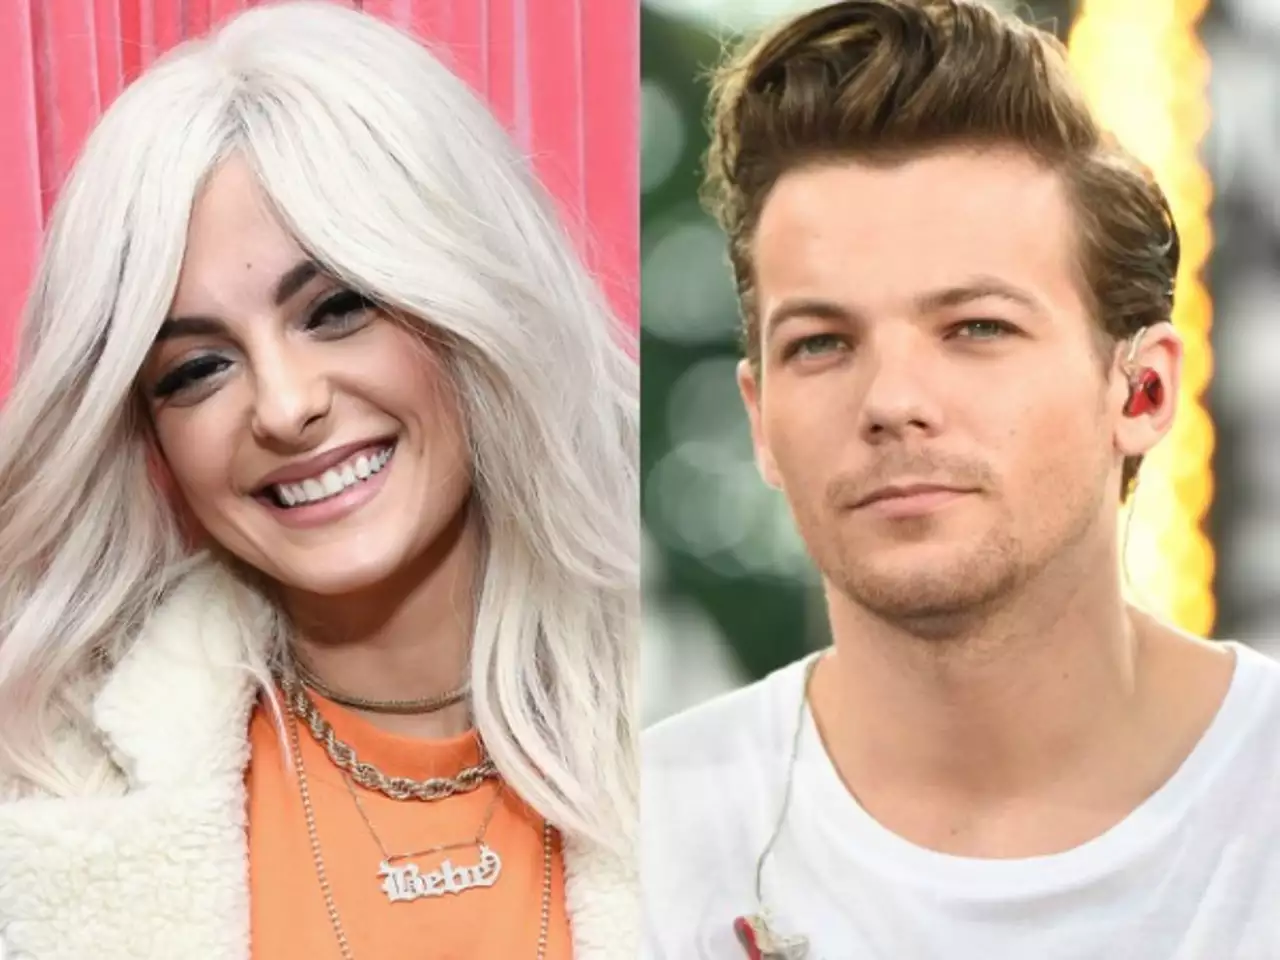 Bebe Rexha has sibling-like relationship with Louis Tomlinson